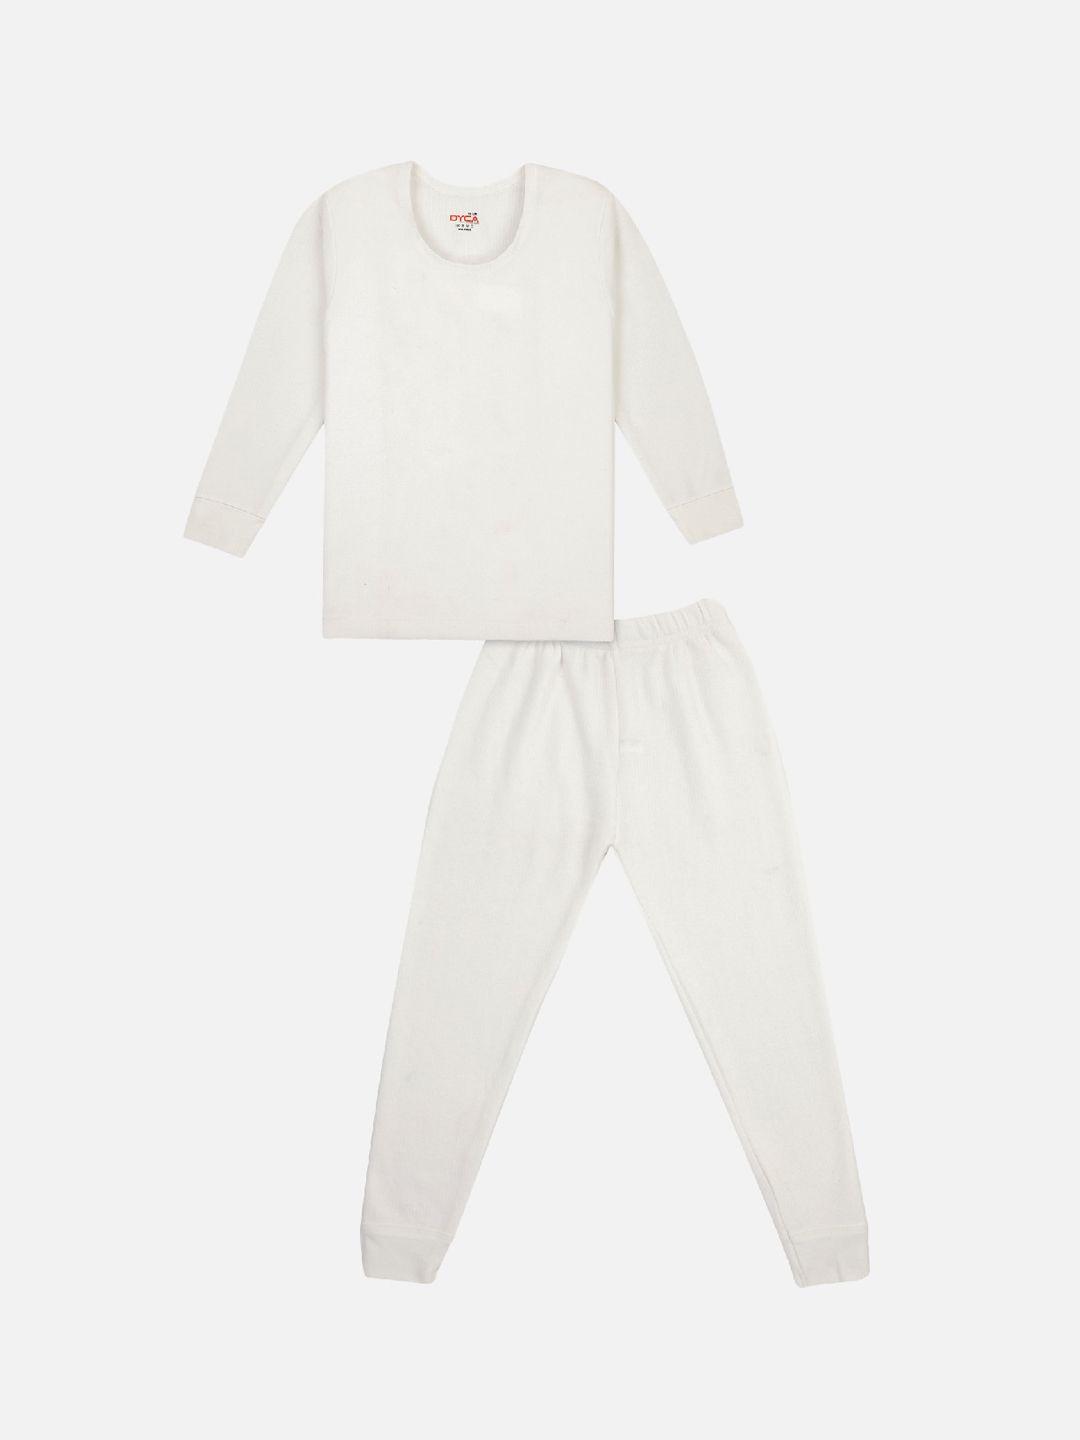 dyca kids off-white solid thermal set